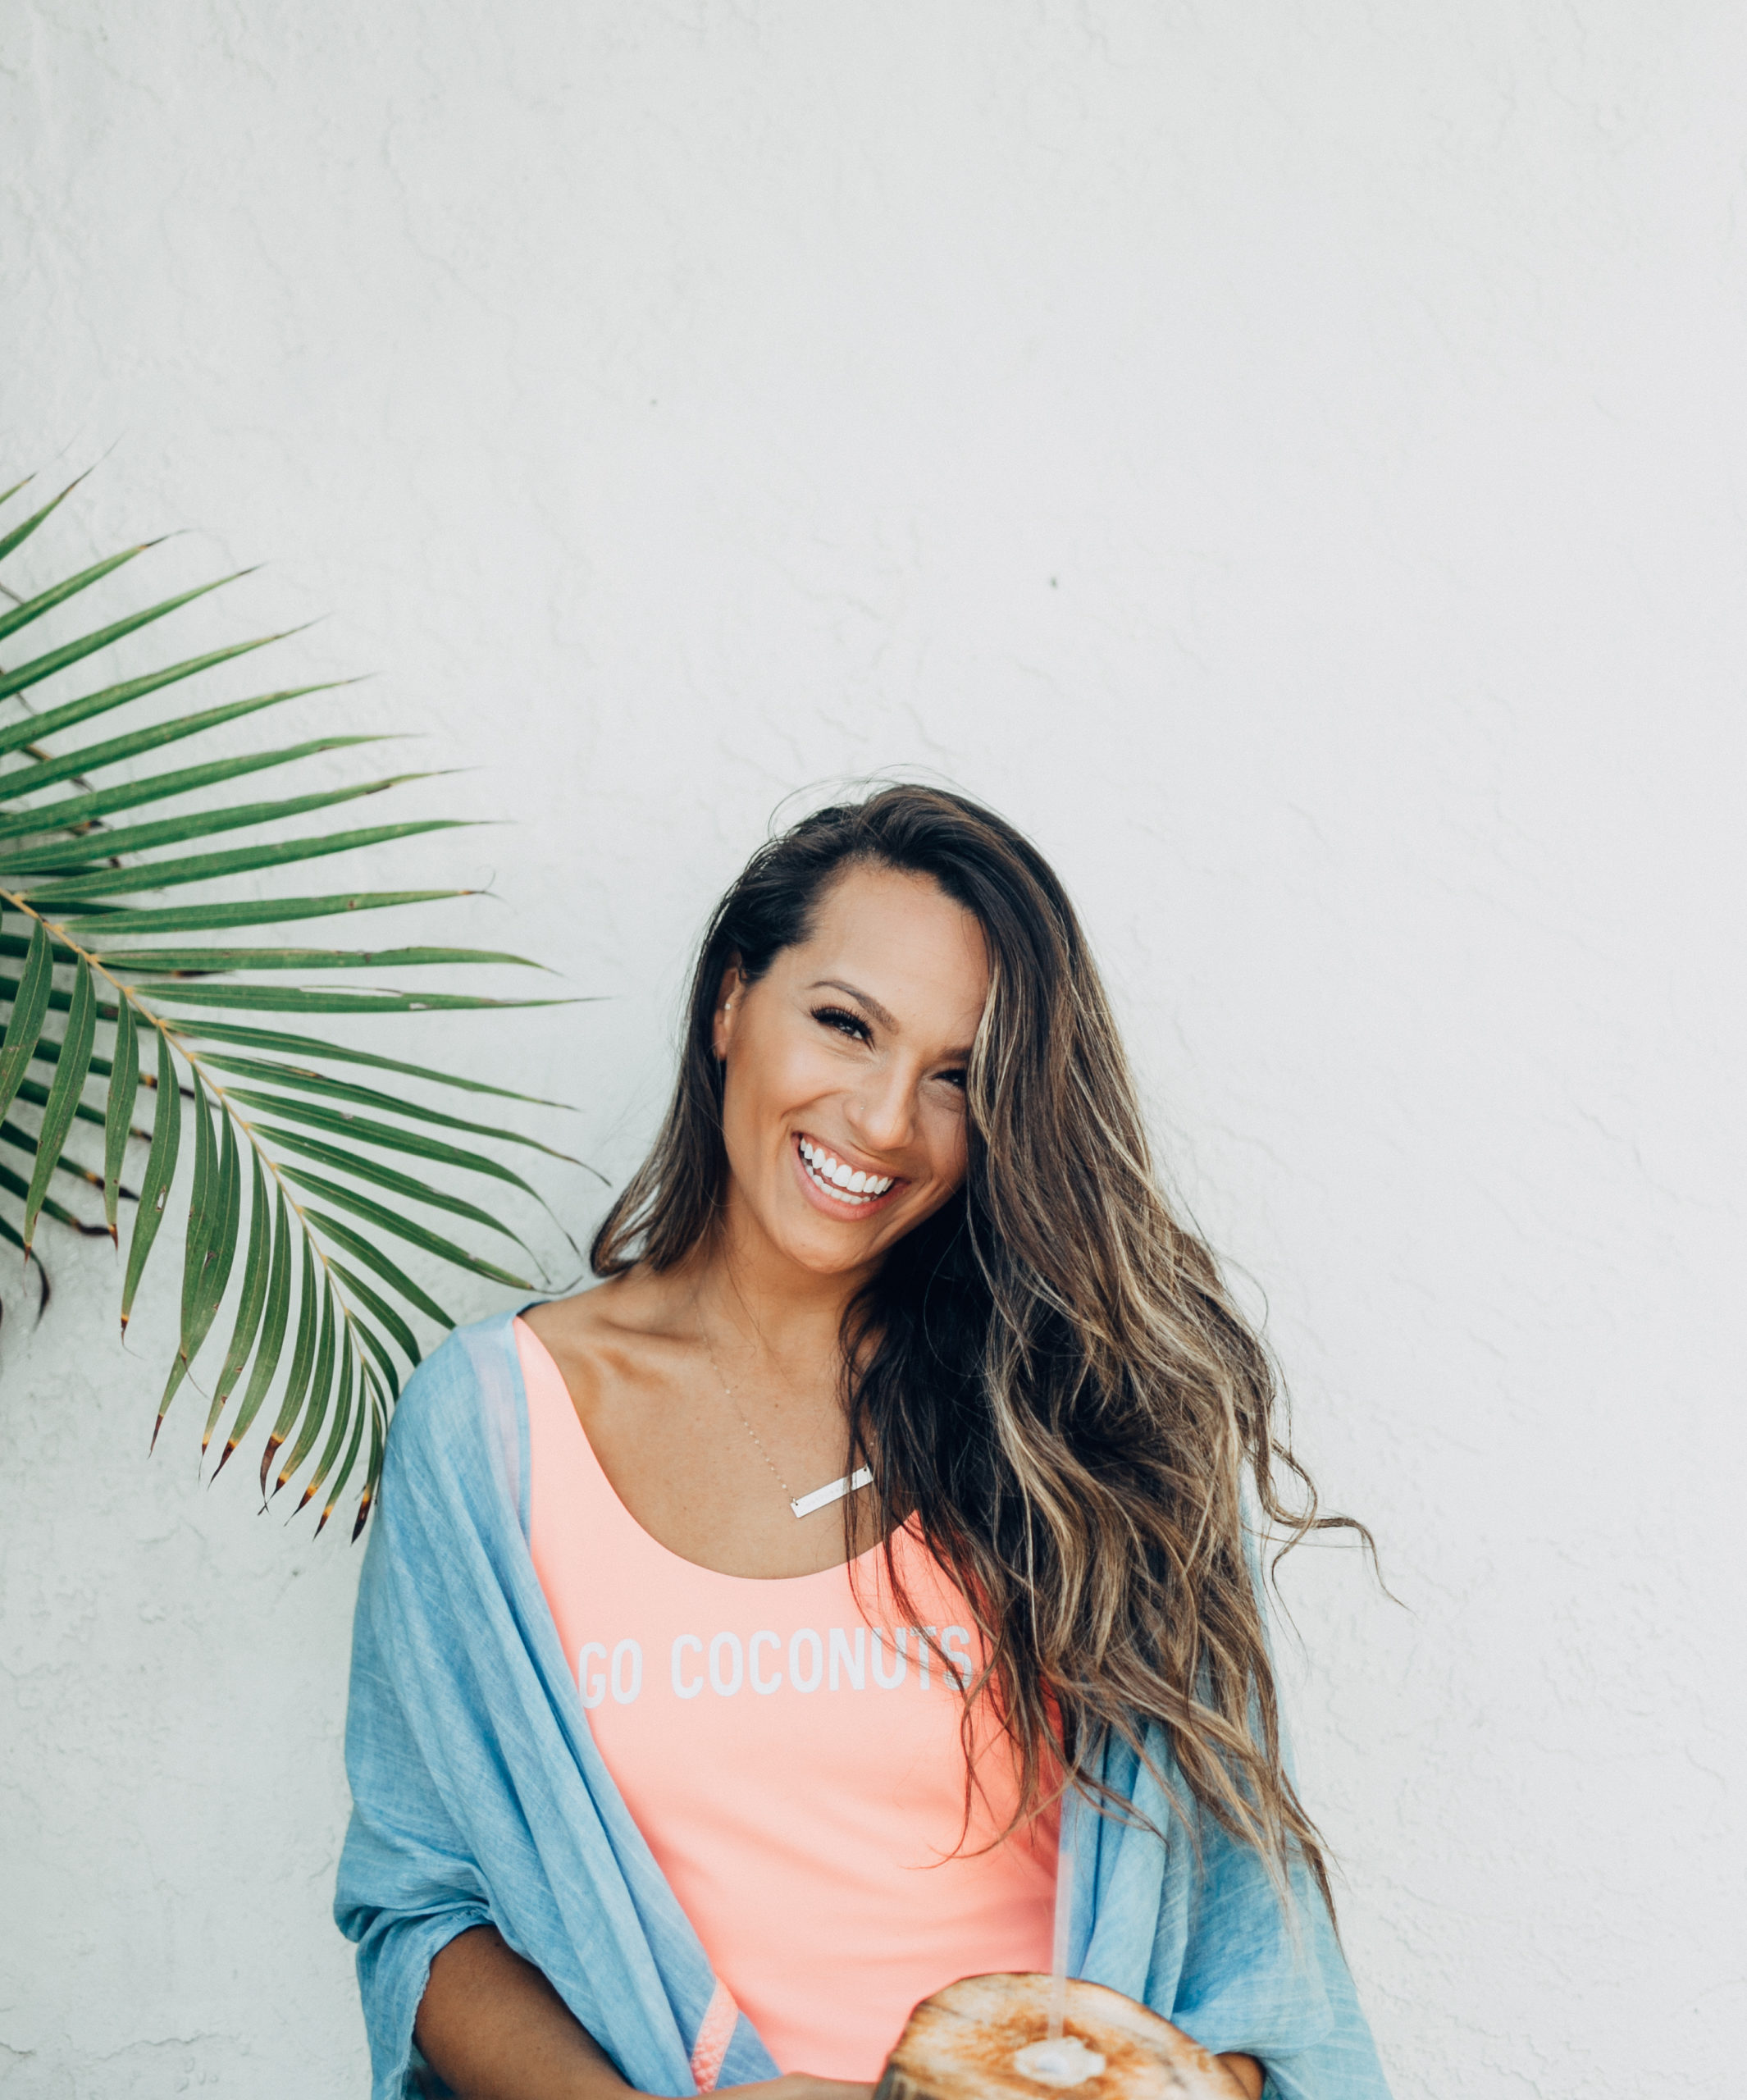 #AerieREAL Campaign | Why I'm #AerieREAL | How Hawaii Taught Me To Love My Body | Body Positive | Love The Skin You're In | Aerie Bikinis | Body Positivity – Love Yourself | Go Coconuts One Piece | Travel Blogger Shares Her Self Love Journey via @elanaloo + elanaloo.com